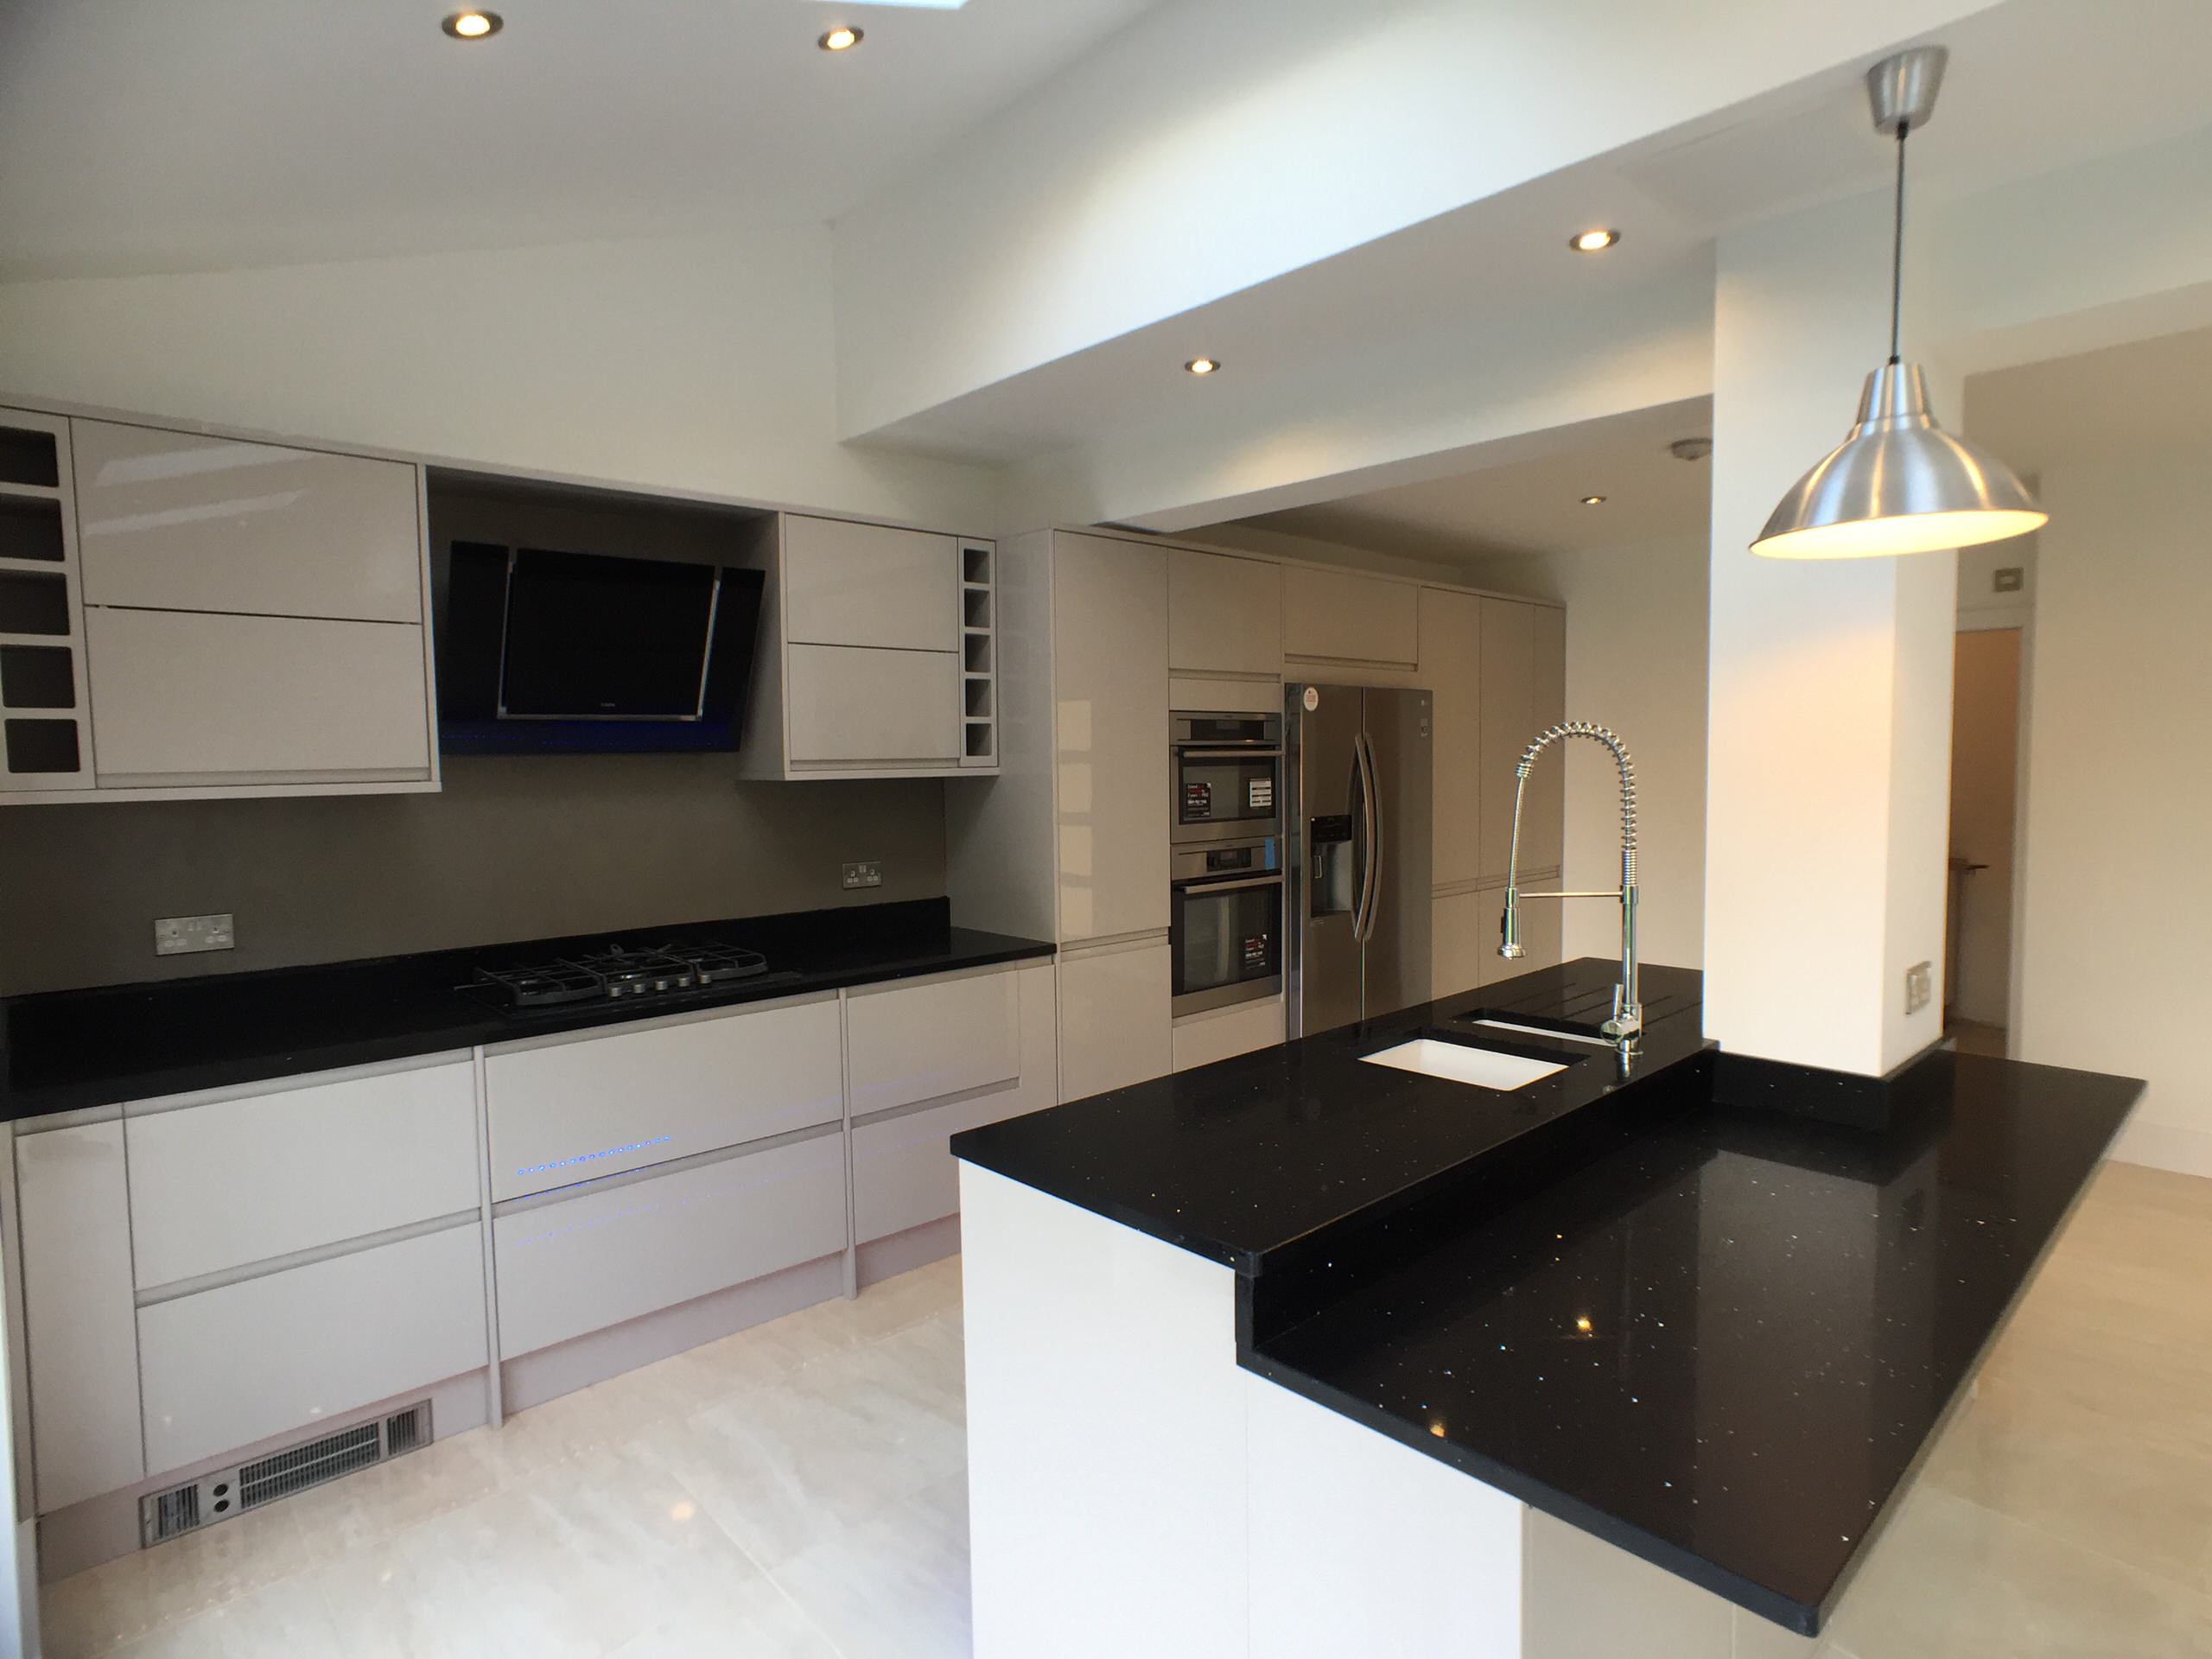 West London Design and Build